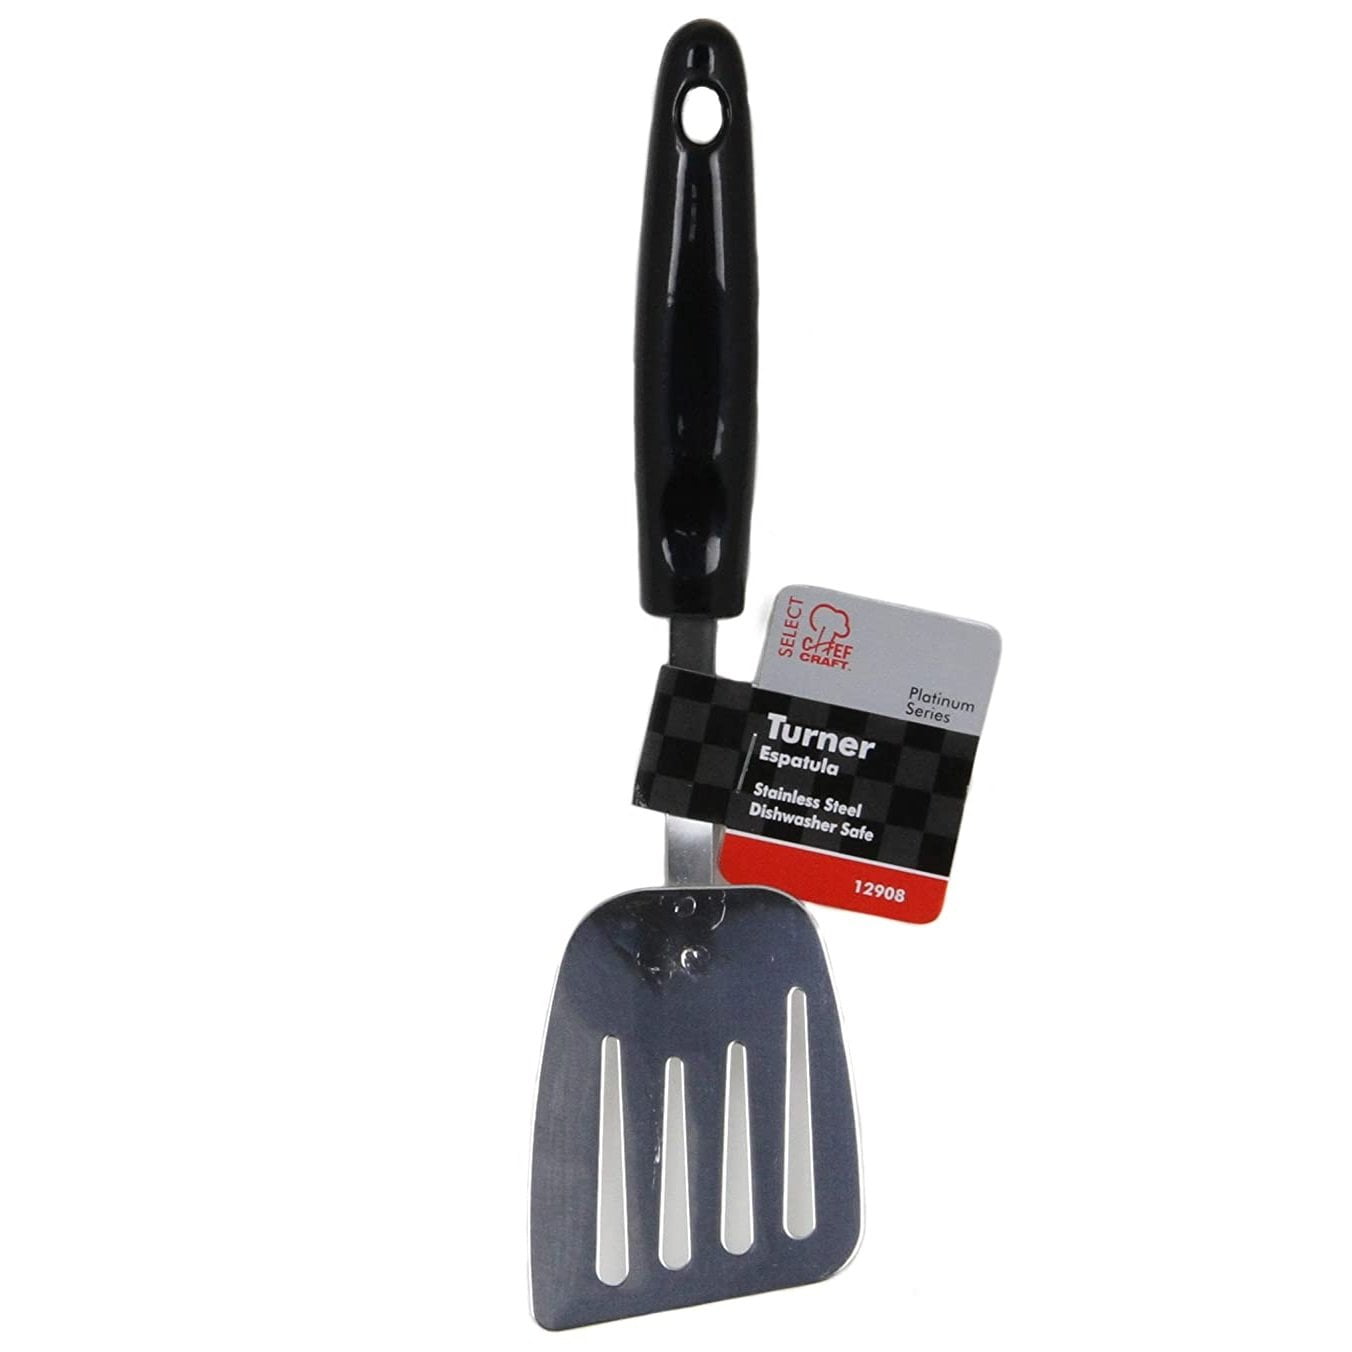 Stainless Steel Cooking Turner| Turner Spatula Cooking Spoon for Flipping  Hot Food| Kitchen Utensil …See more Stainless Steel Cooking Turner| Turner